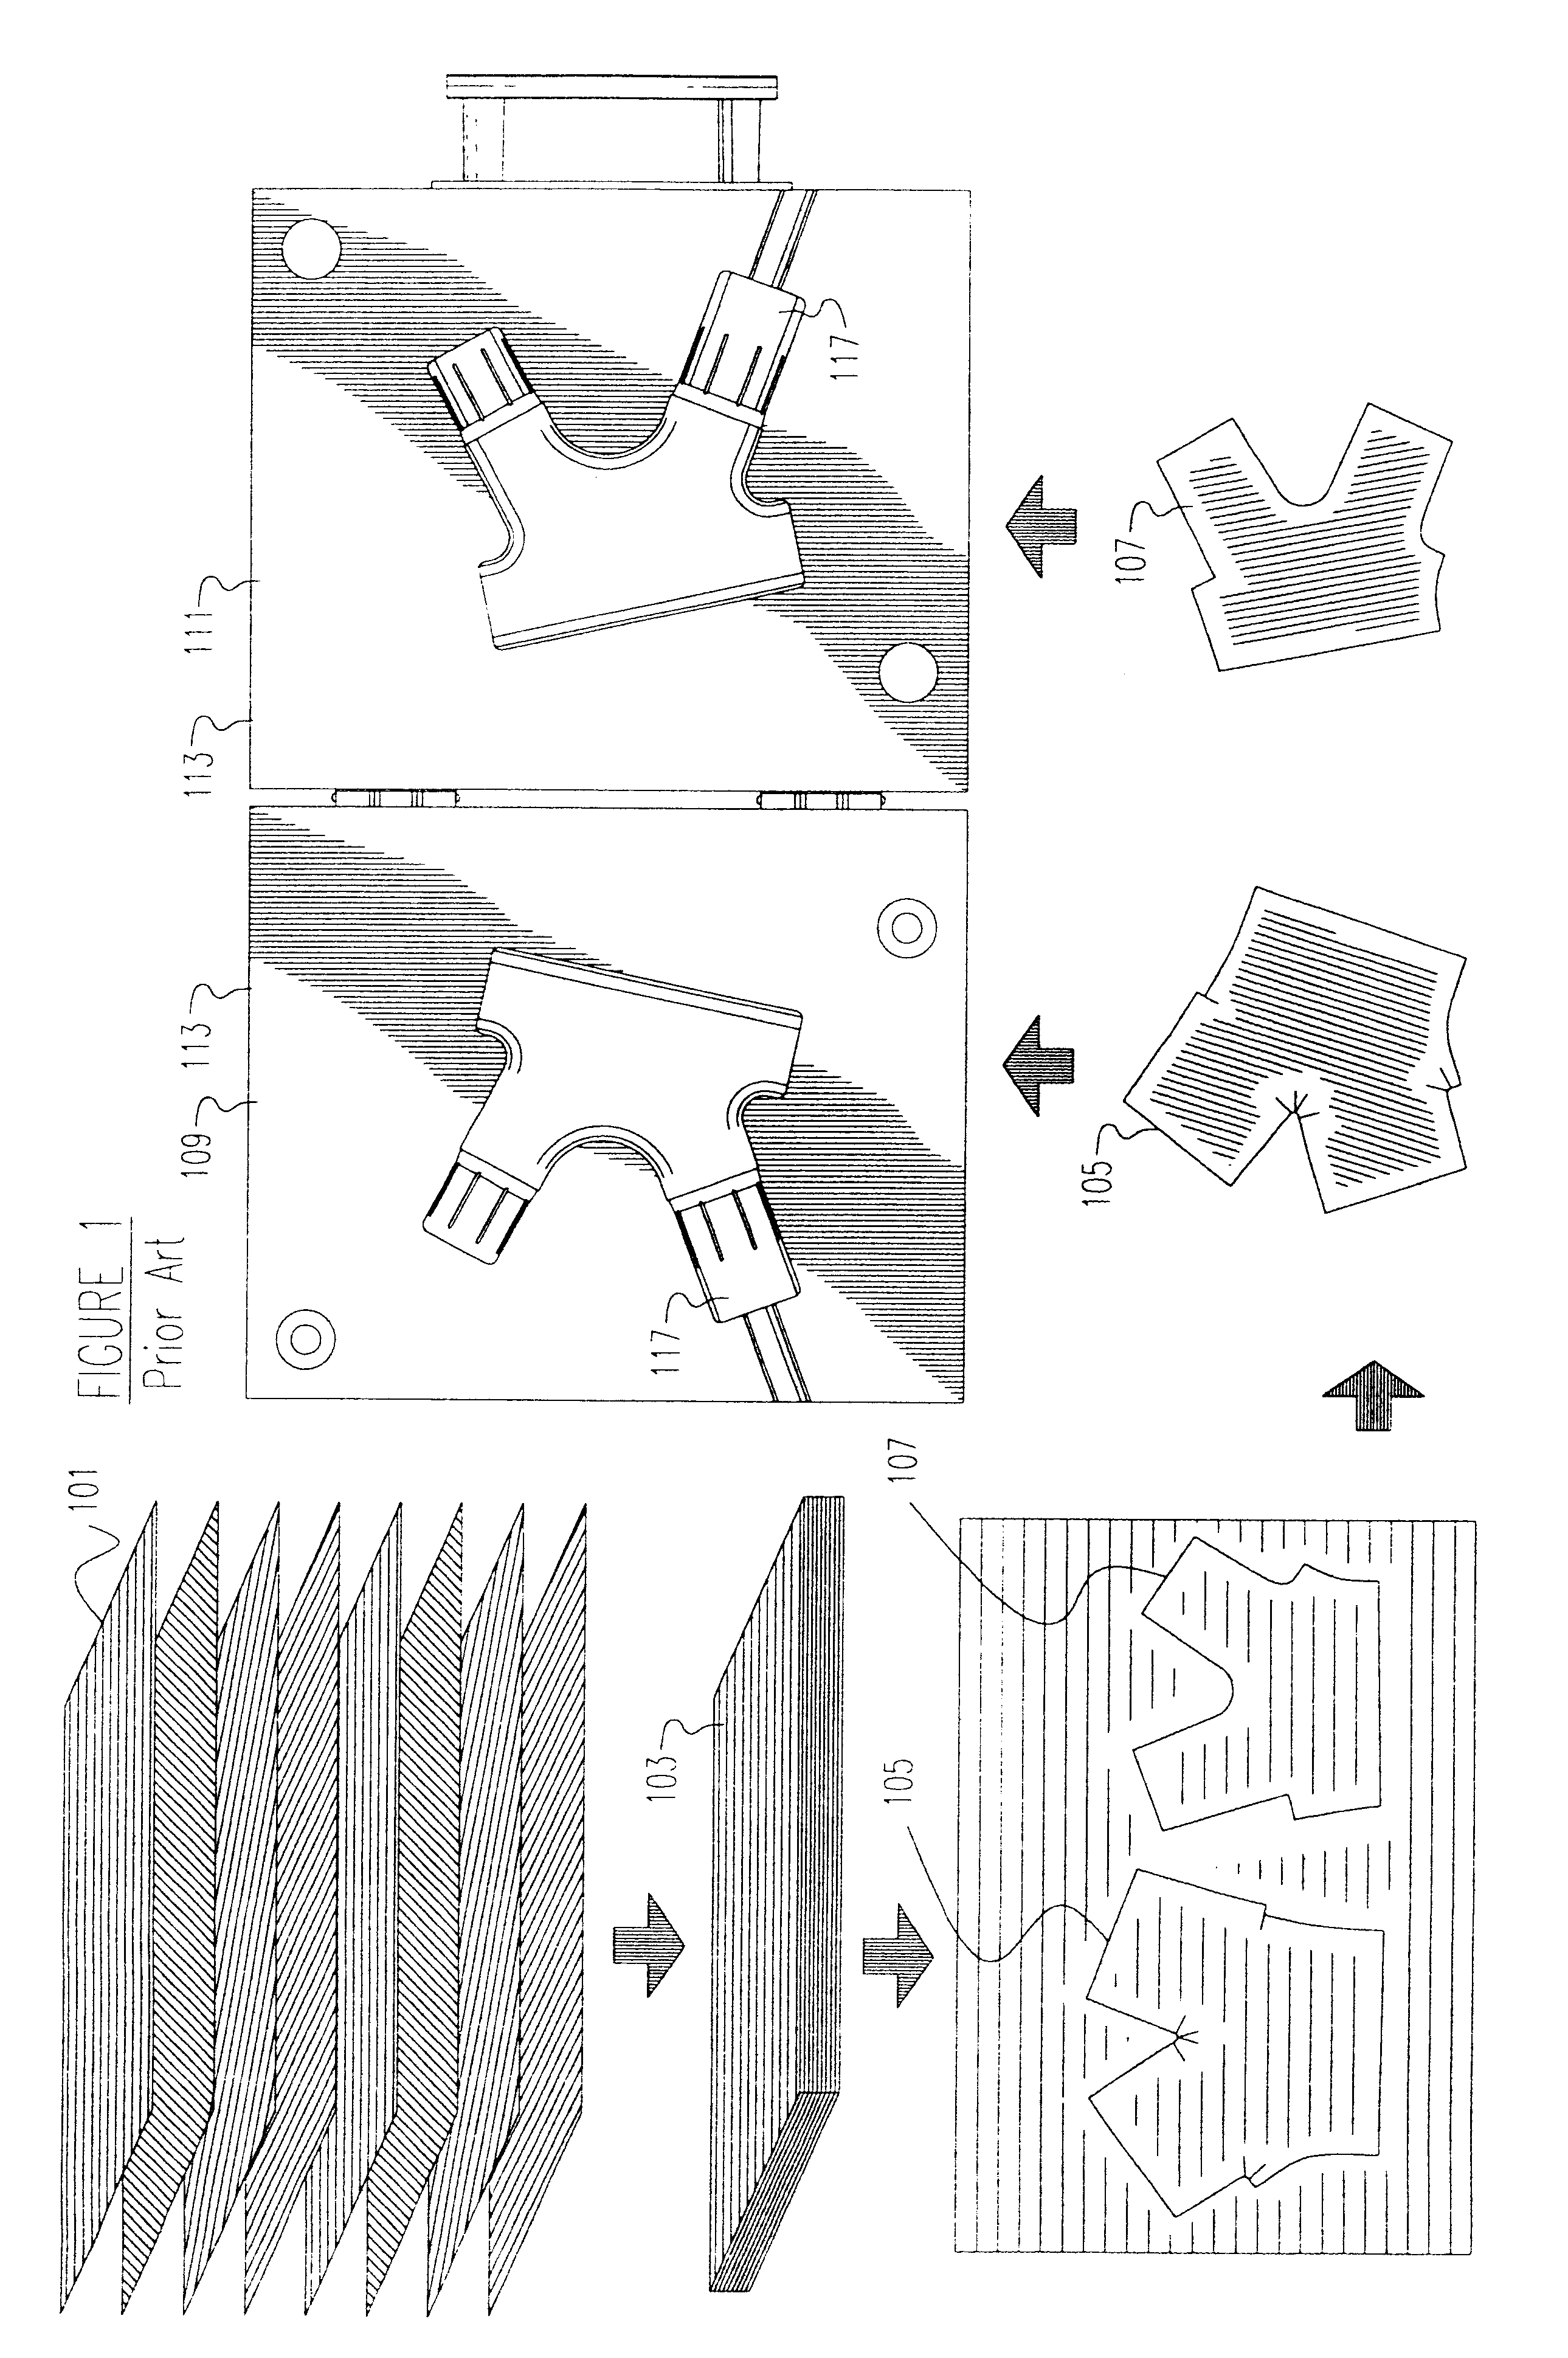 Method for manufacturing composite bicycle frame